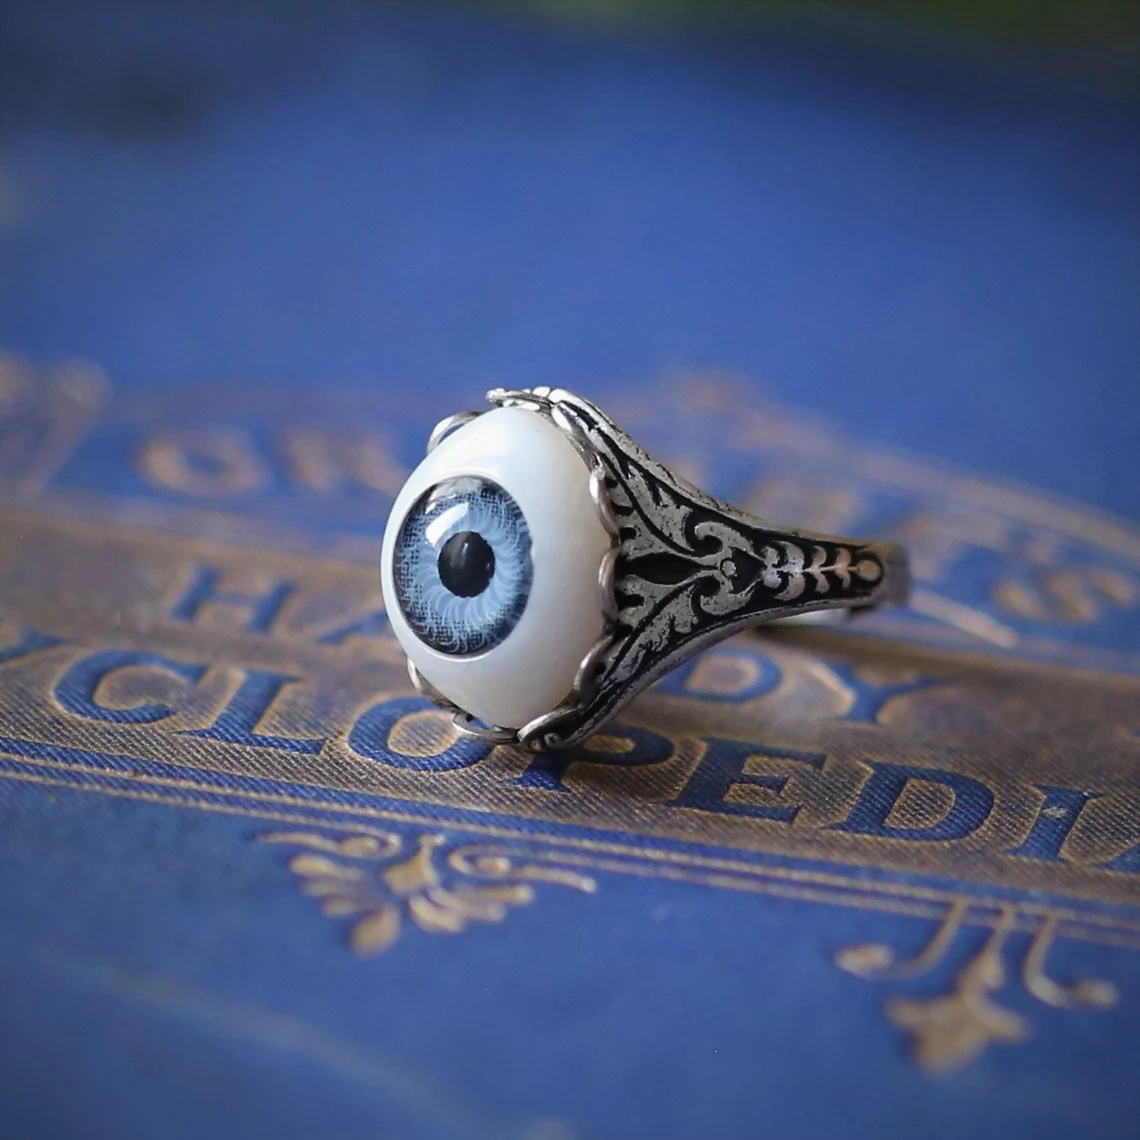 Gothic Rock Style Eyeball Shaped Ring, Creative Cat's Eye Shape Alloy Ring  - Stand Out From The Crowd, Exquisite Men's Accessory Jewelry Ornament For  Daily Wear For Banquet Party Holiday Birthday